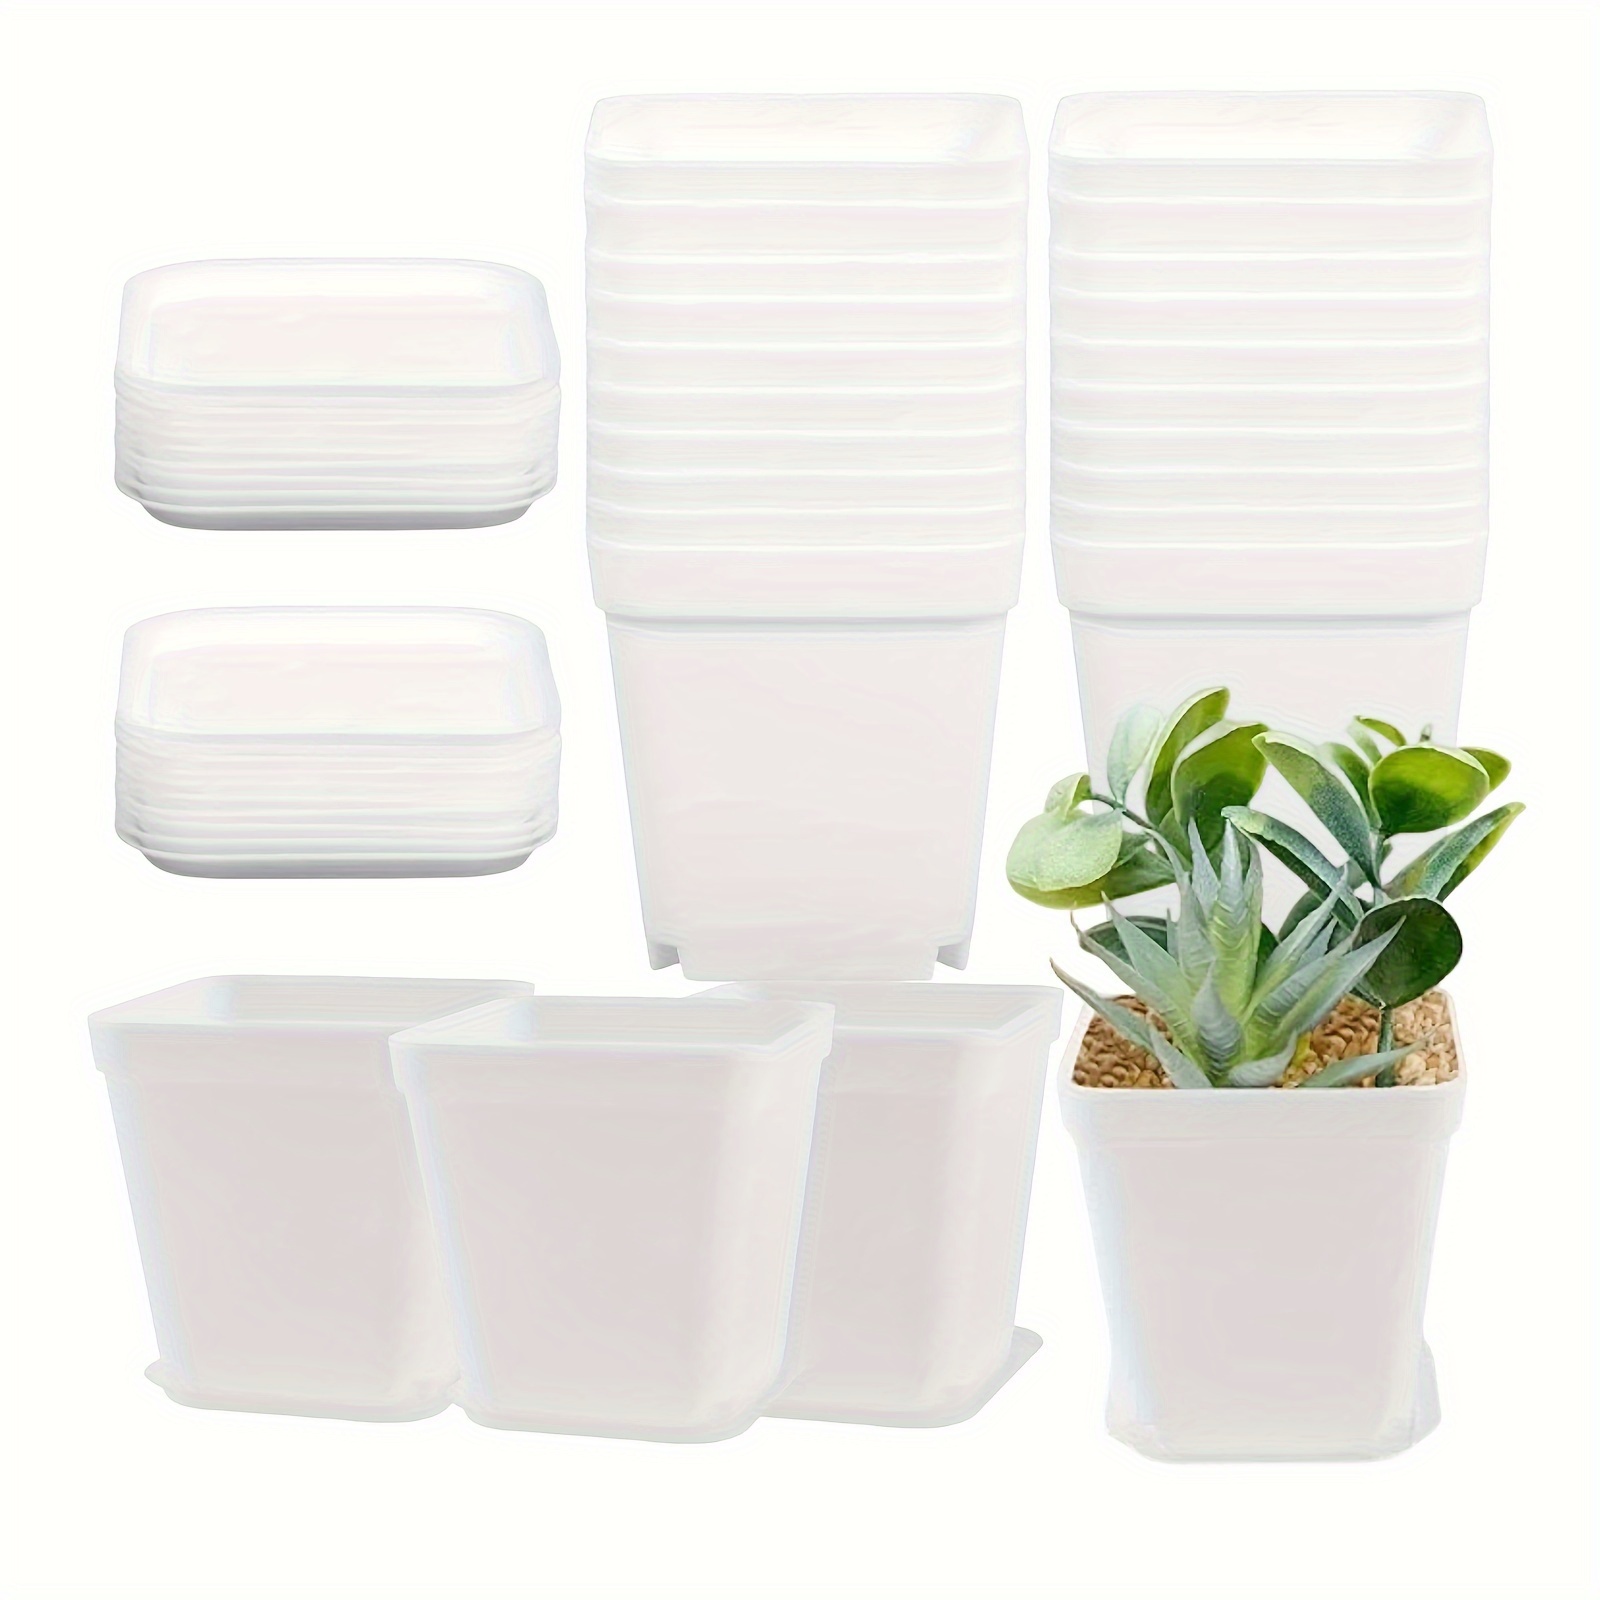 

24pcs Of White Square Plastic Flower Pots With Tray, Drainage Holes, Suitable For Flowers/plants, Home, Company, Office, And Garden (white)